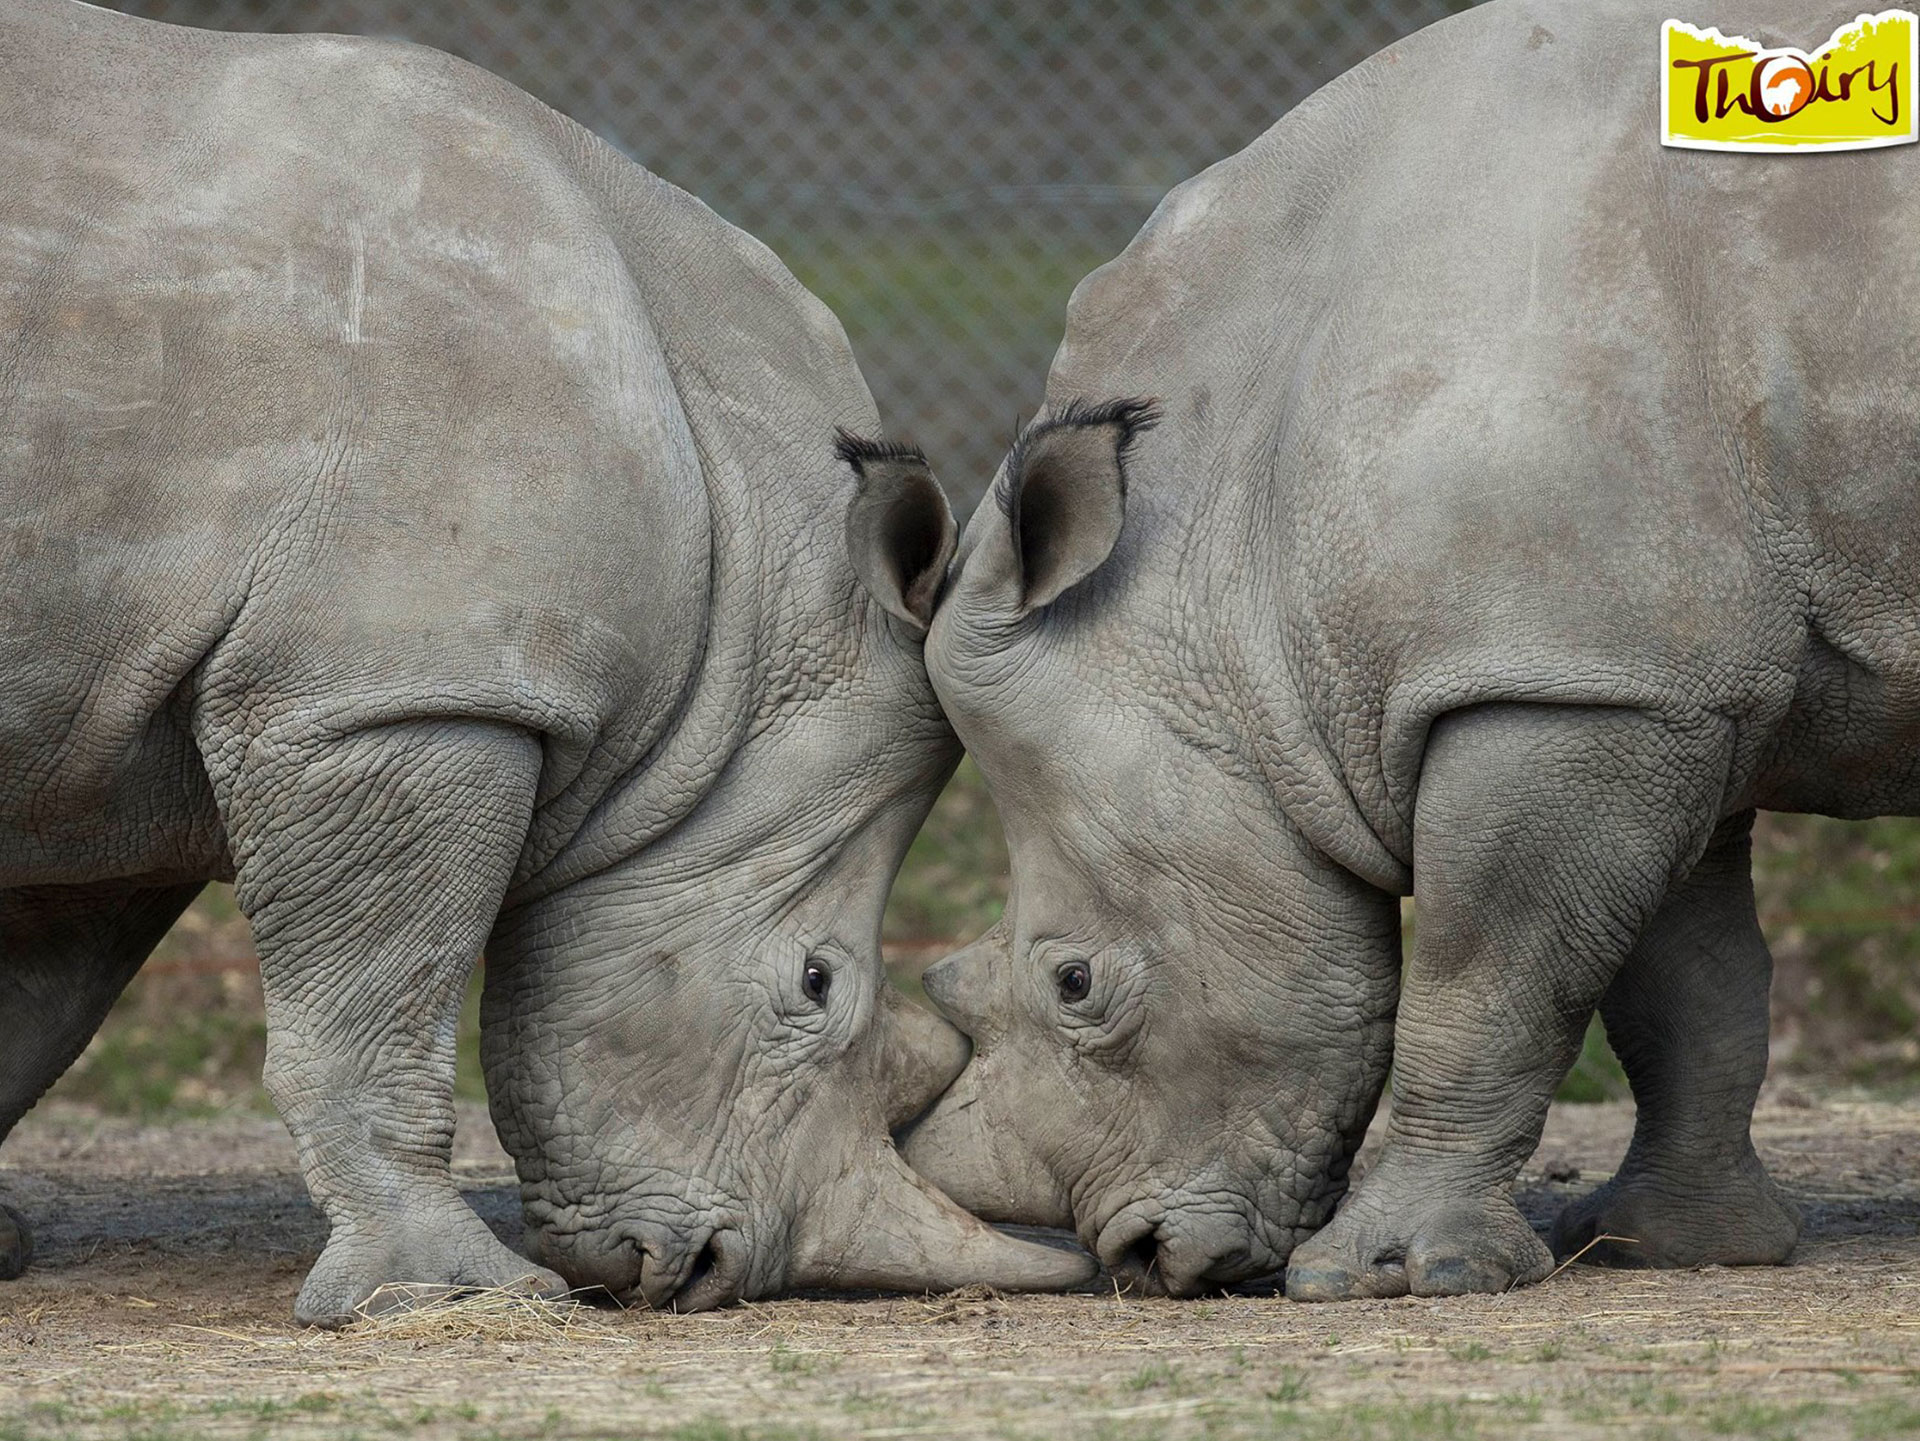 Poachers kill rhino and saw off his horn after breaking into Paris zoo